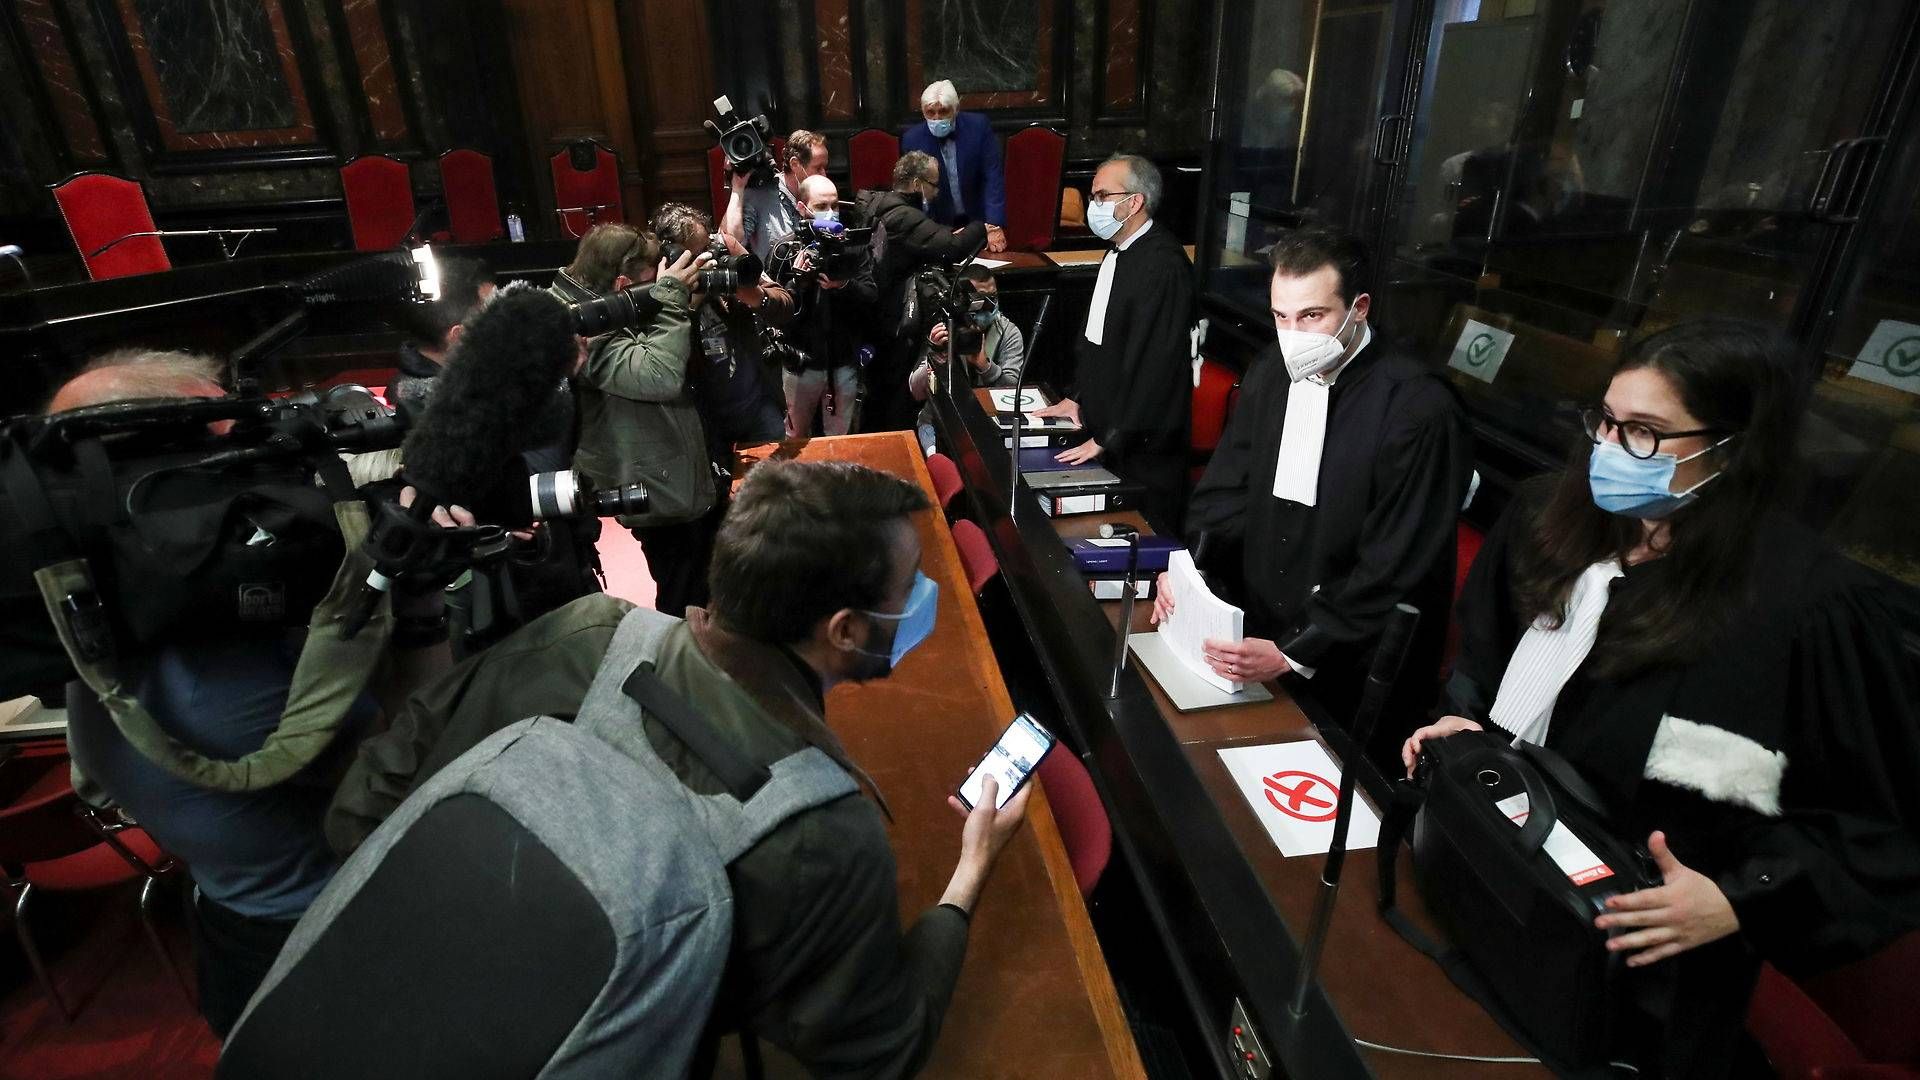 Lawyers for Astrazeneca Clemence Van Muylder, Hakim Boularbah and Stephanie De Smedt, arrive to attend a hearing at a Belgian court in the legal case against the British-Swedish firm accused by the EU of having breached its contract for the supply of the coronavirus disease (COVID-19) vaccines, in Brussels, Belgium May 26, 2021. | Photo: Yves Herman/Reuters/Ritzau Scanpix